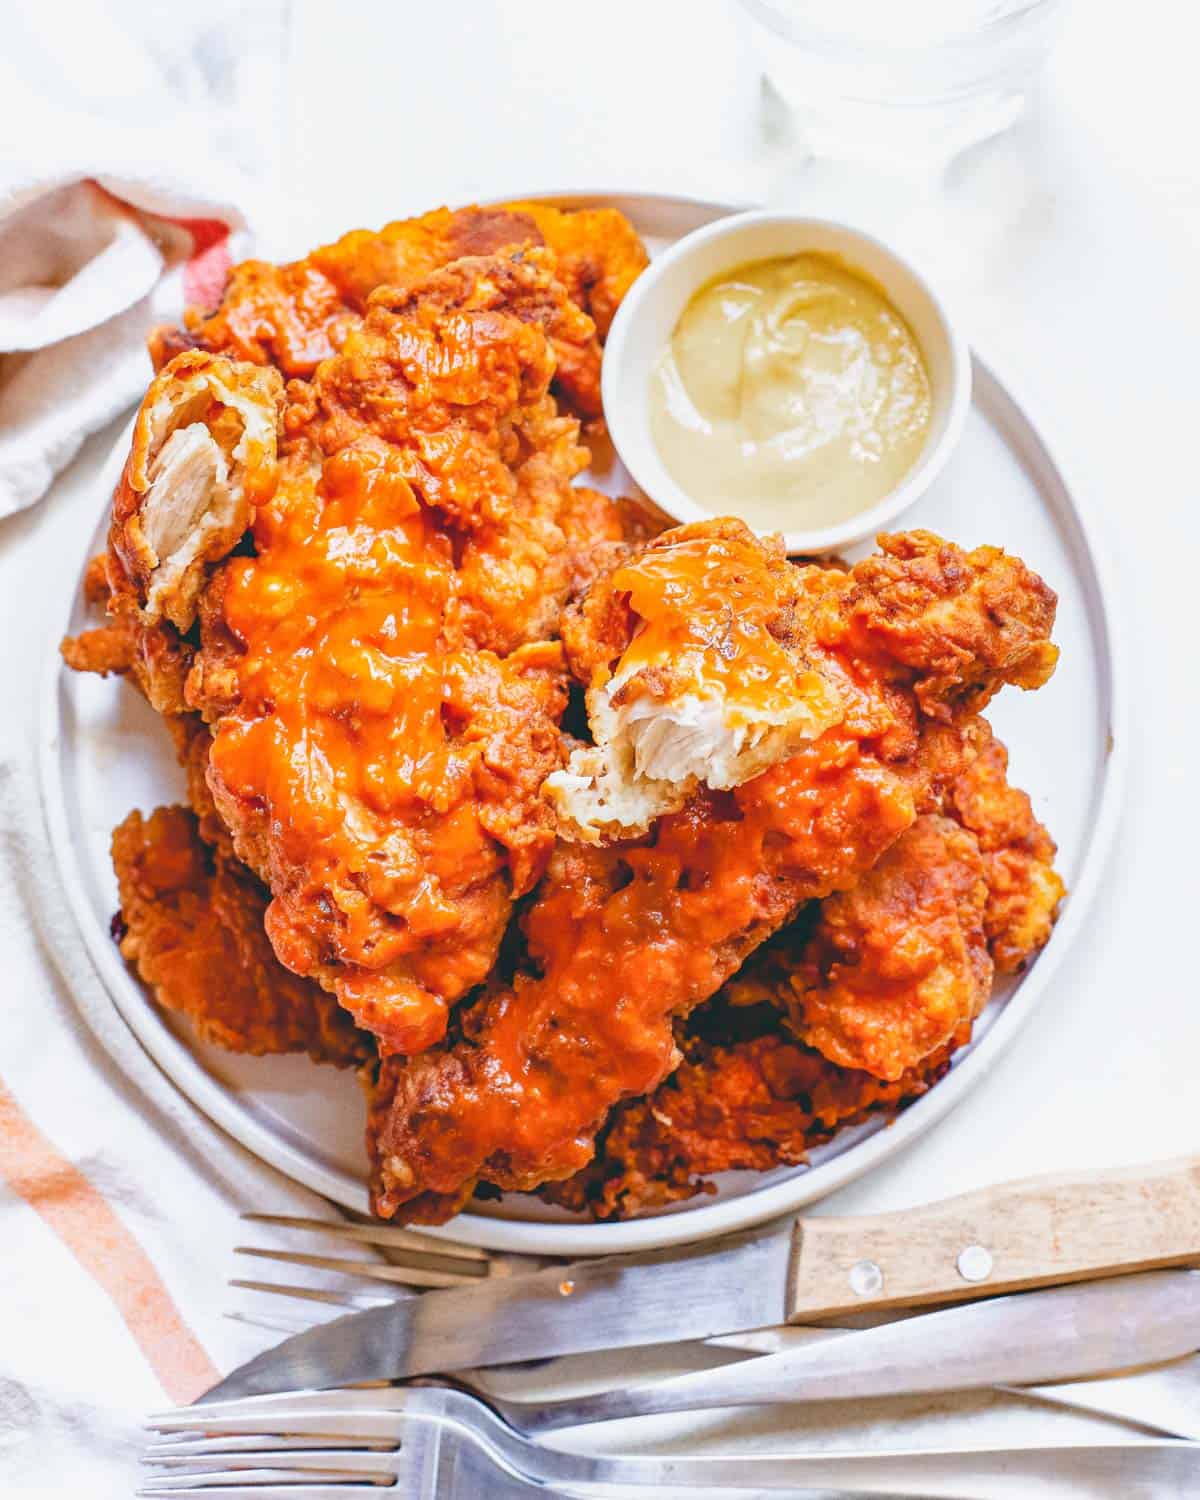 Air fryer buffalo chicken recipe piled on a plate served with a dipping sauce.